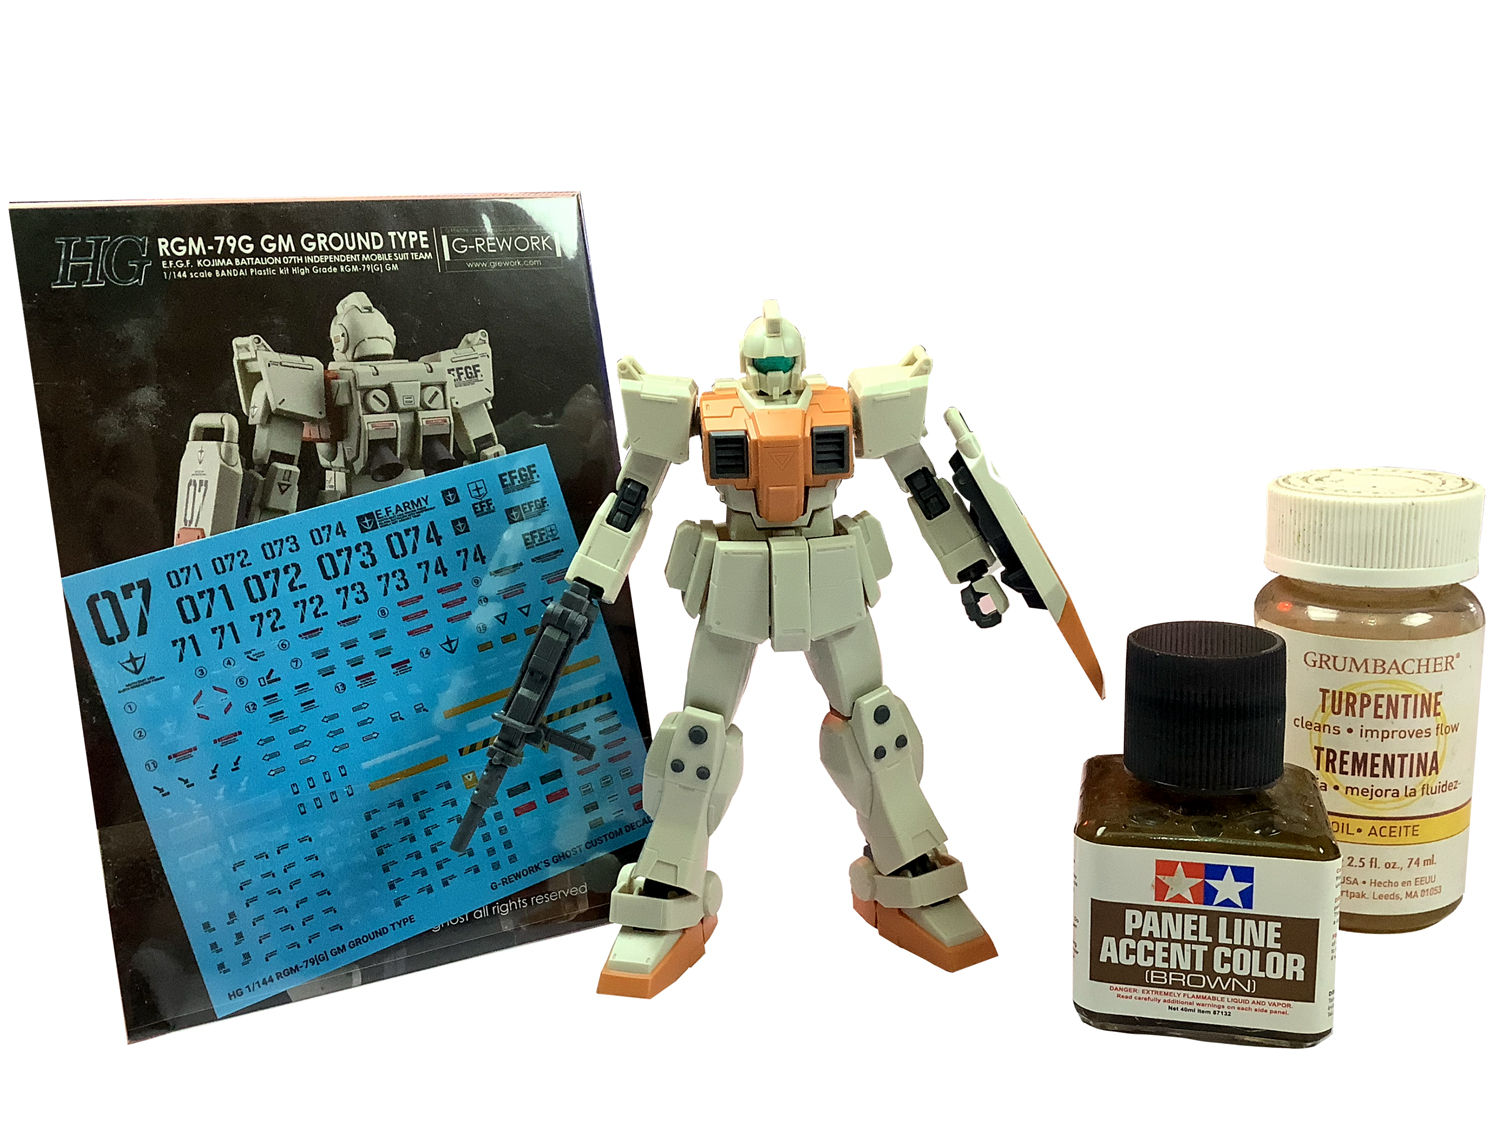 Anyone can learn how to build great looking Gundam model kits